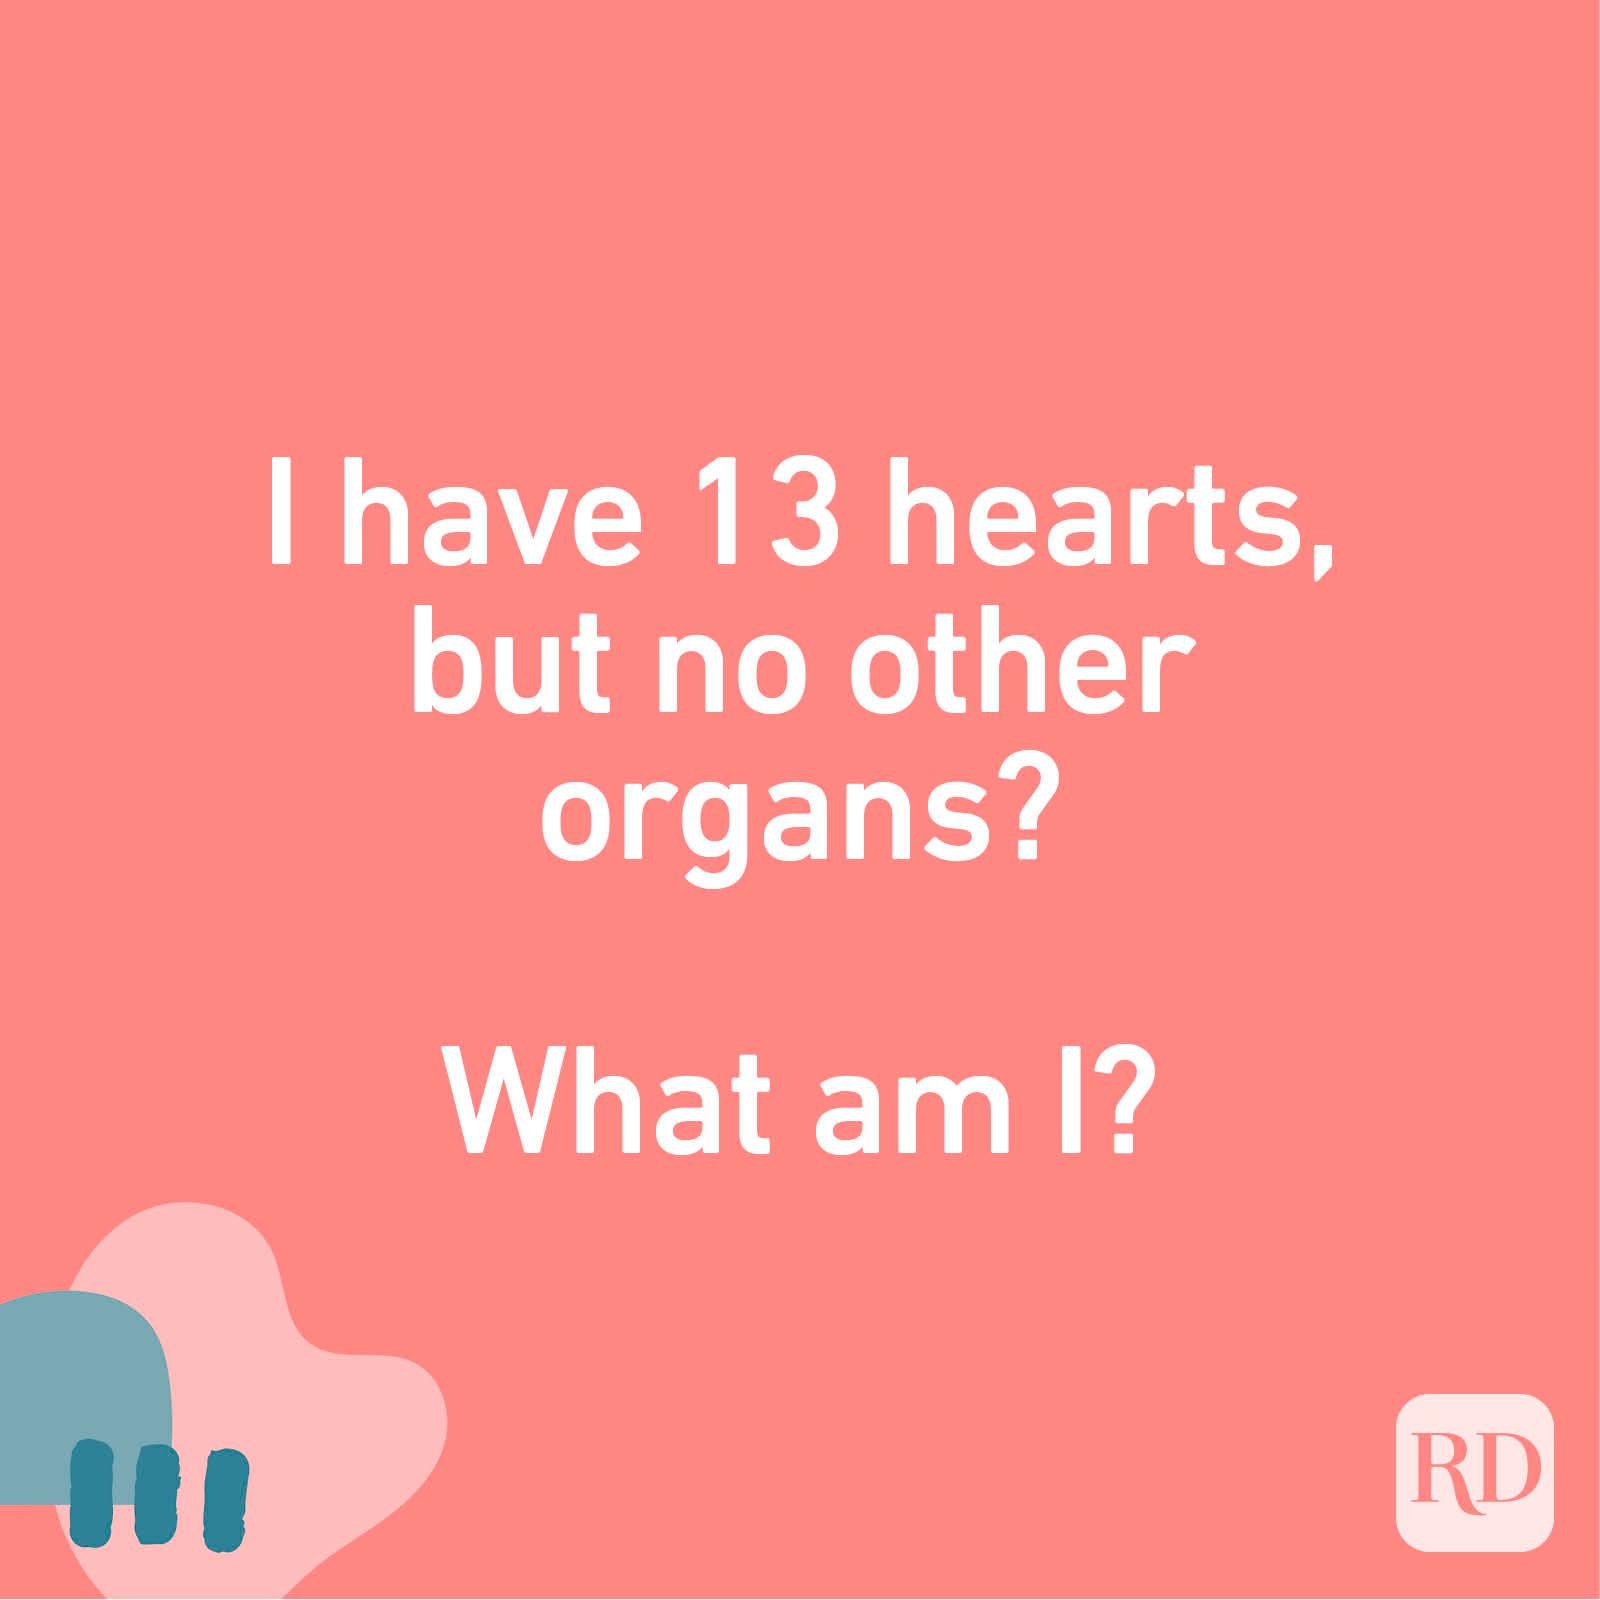 I have 13 hearts, but no other organs? What am I?